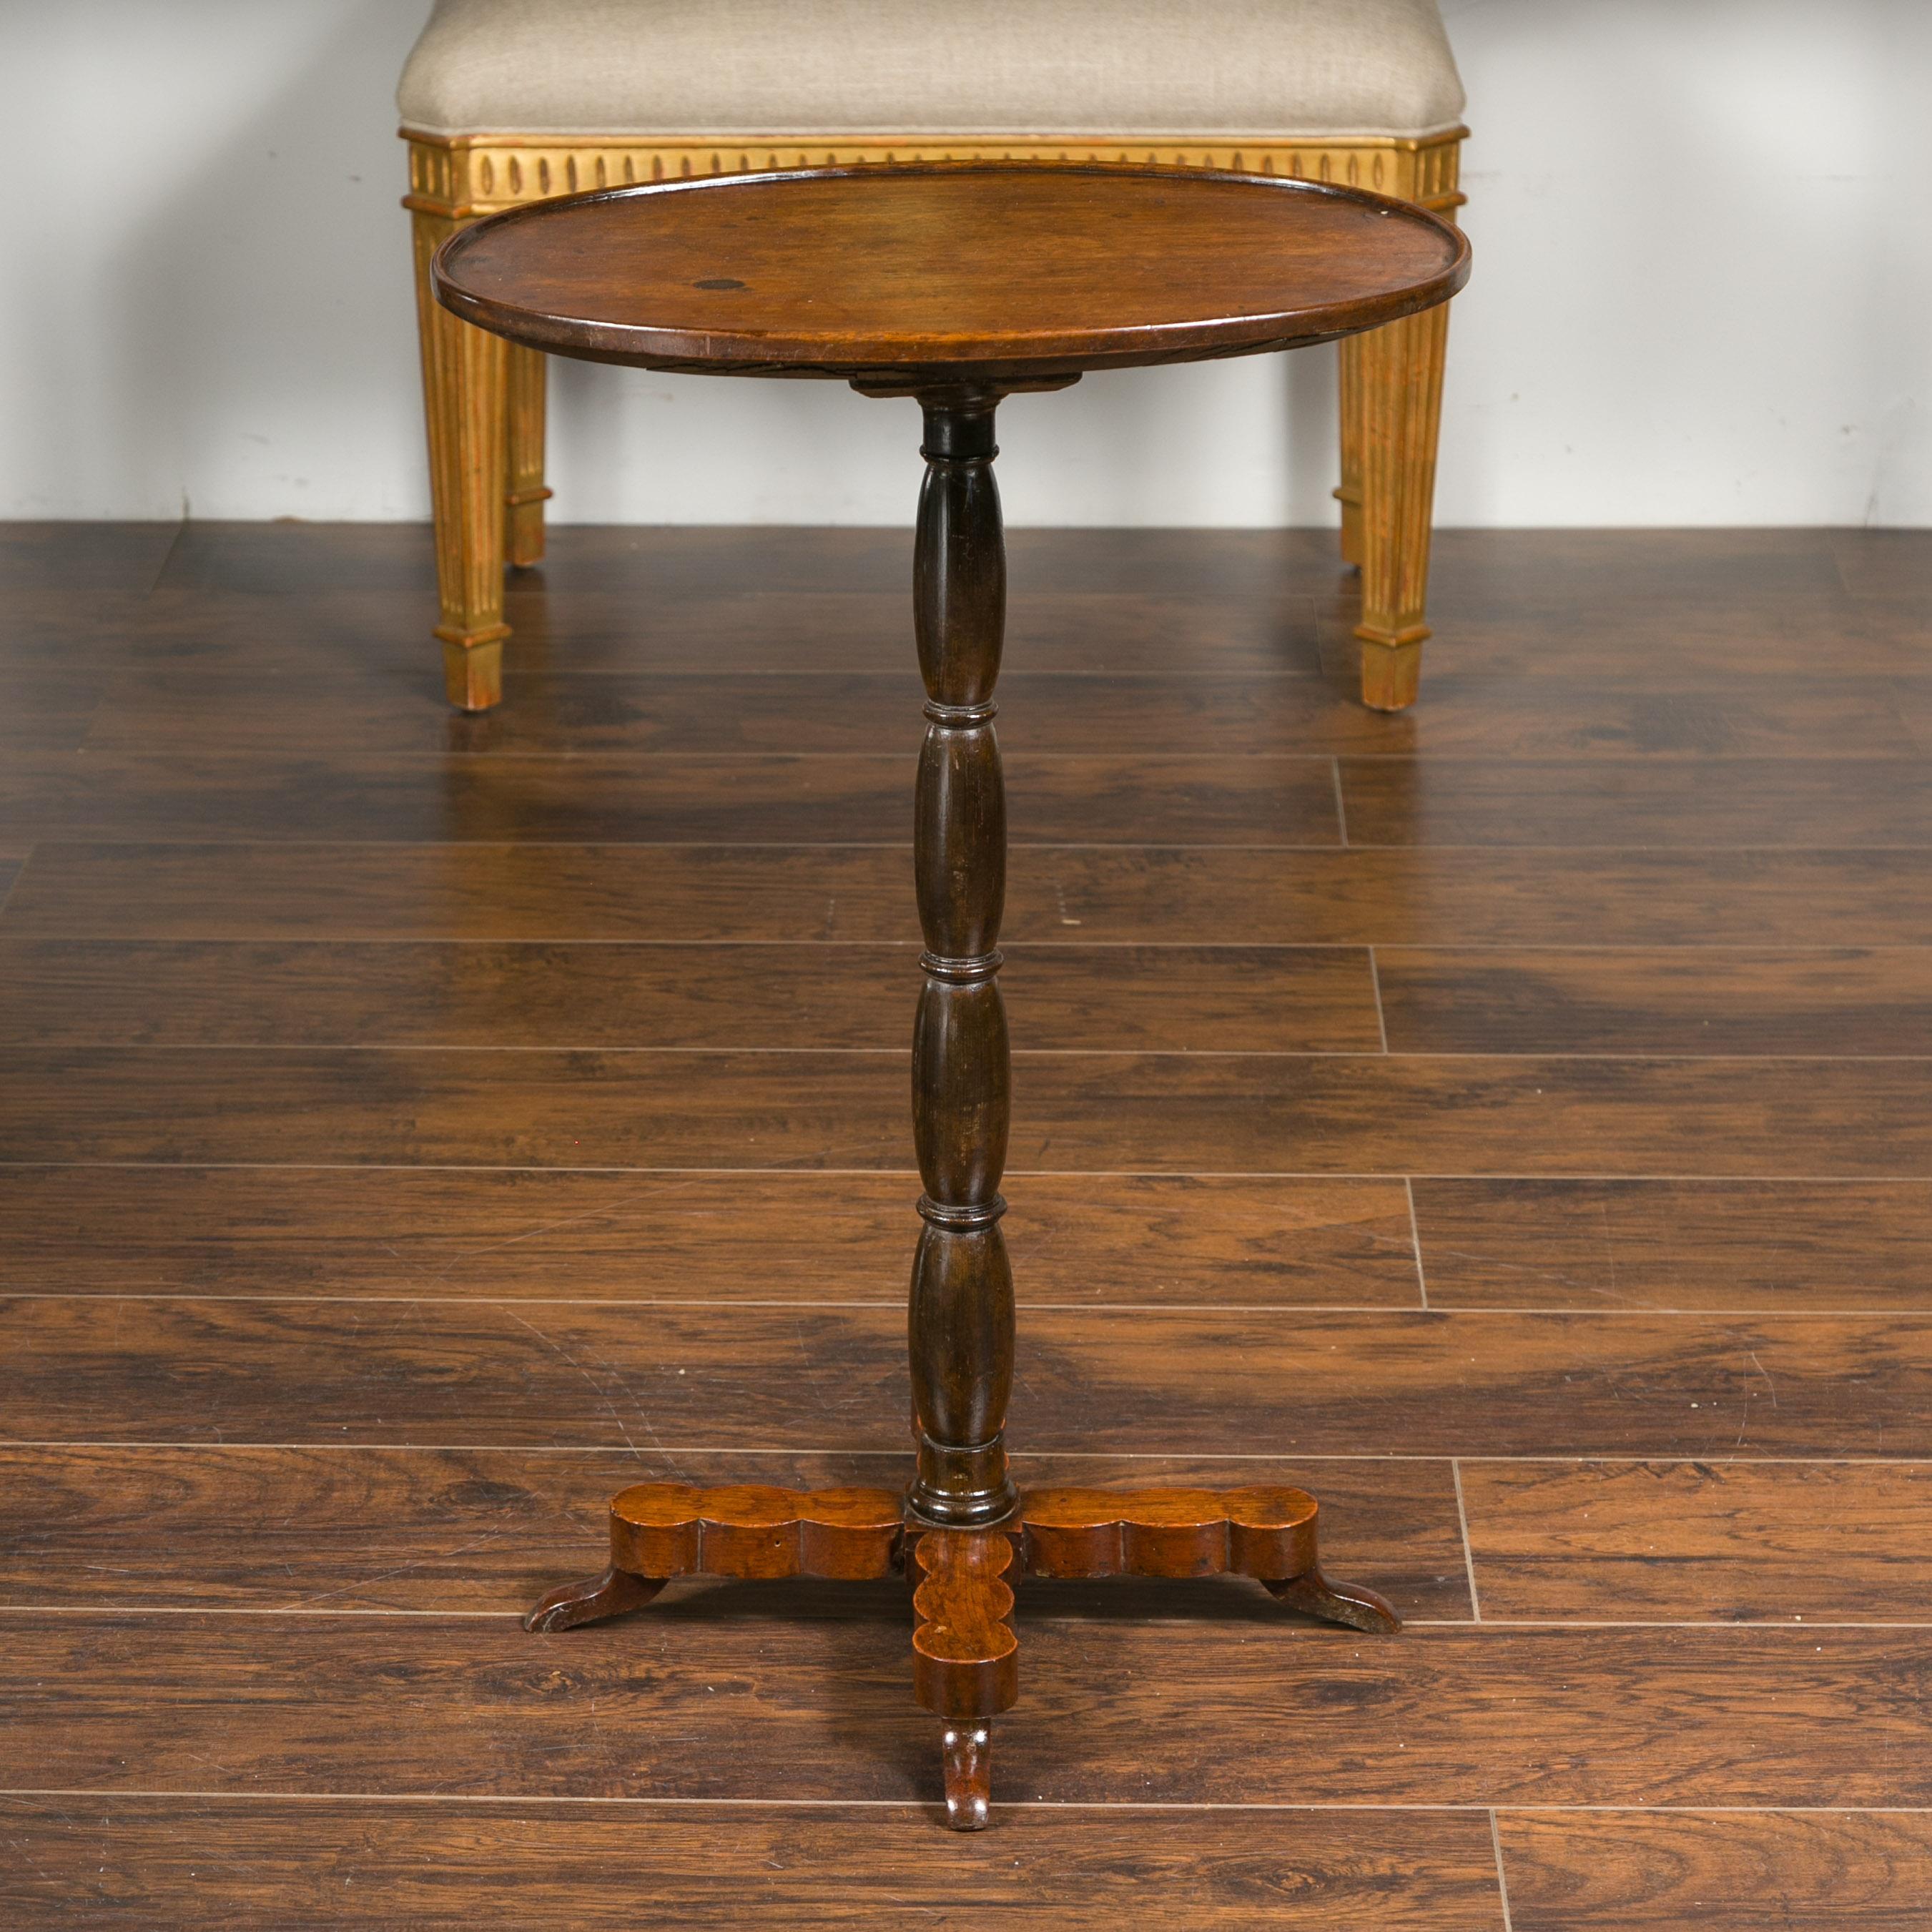 A French walnut guéridon table from the late 19th century, with oval top and turned pedestal base. Crafted in France during the last quarter of the 19th century, this walnut side table features an oval top with slightly raised edges, sitting above a